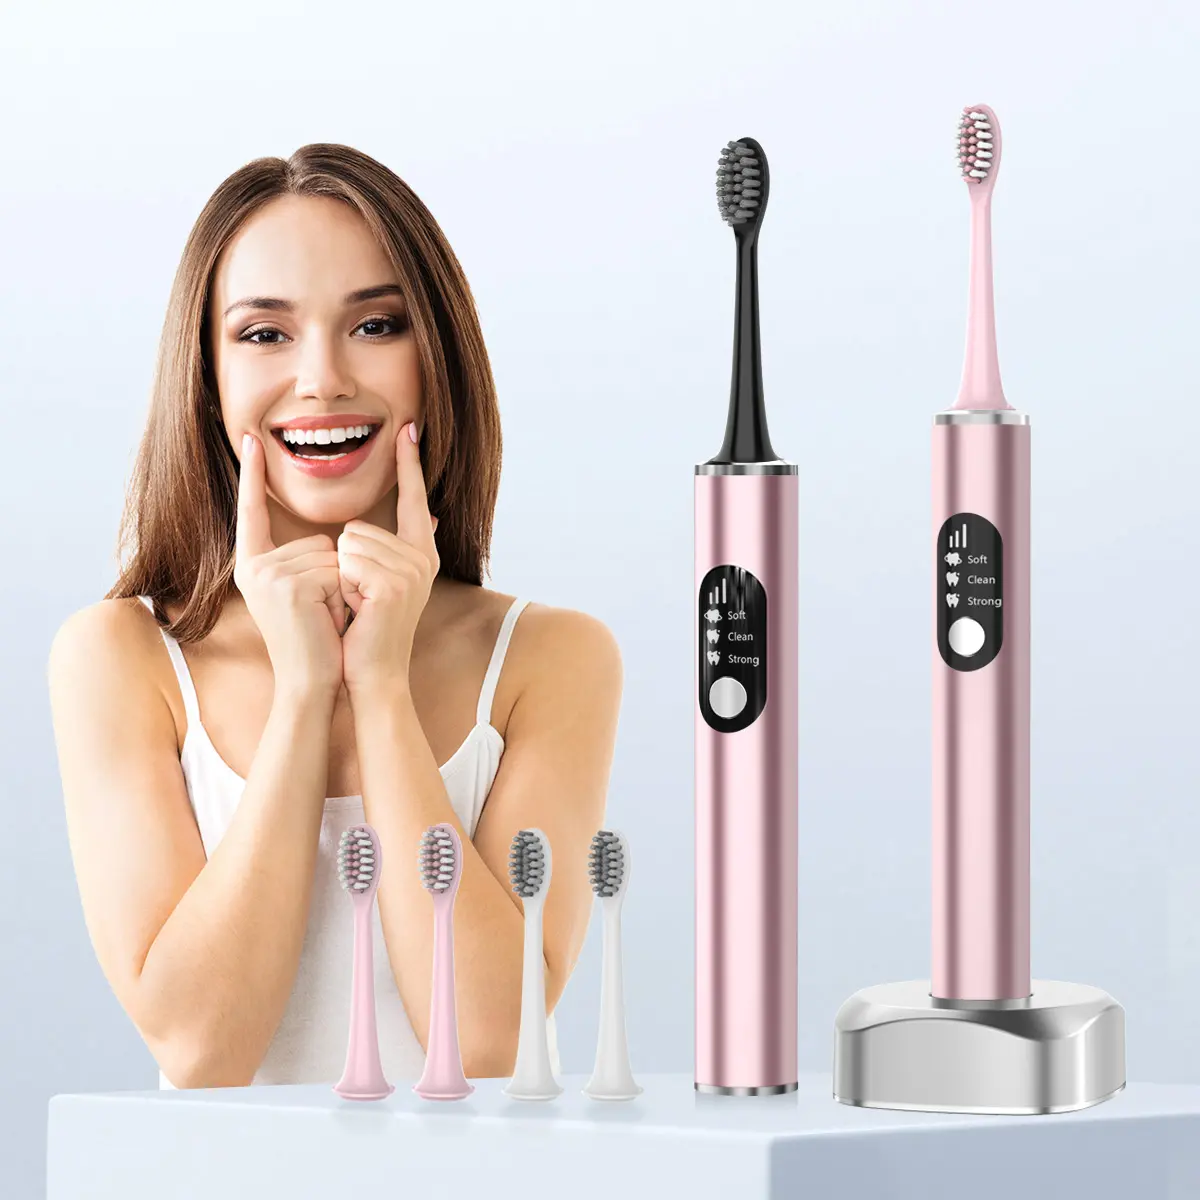 Oral care high quality patent travel sonic electric toothbrush with LED Display and dupont soft bristle